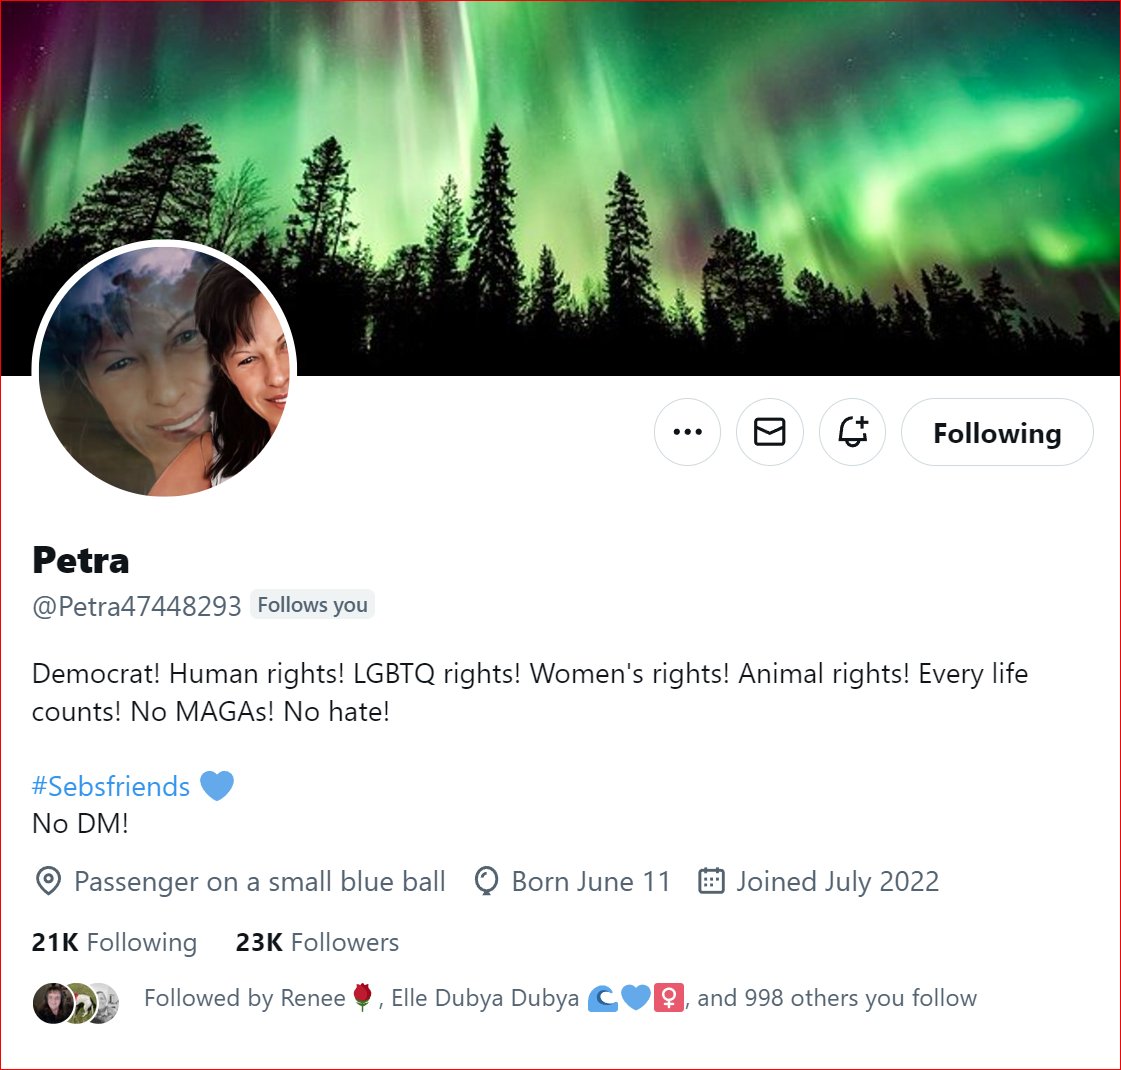 Petra @Petra47448293 is a fabulous blue friend who has been kind and compassionate and always willing to support and love. Today she crushed her 23K with your help. I'd like to celebrate her with y'all. Let's do that. Celebrate, congratulate, and wish for continued success.